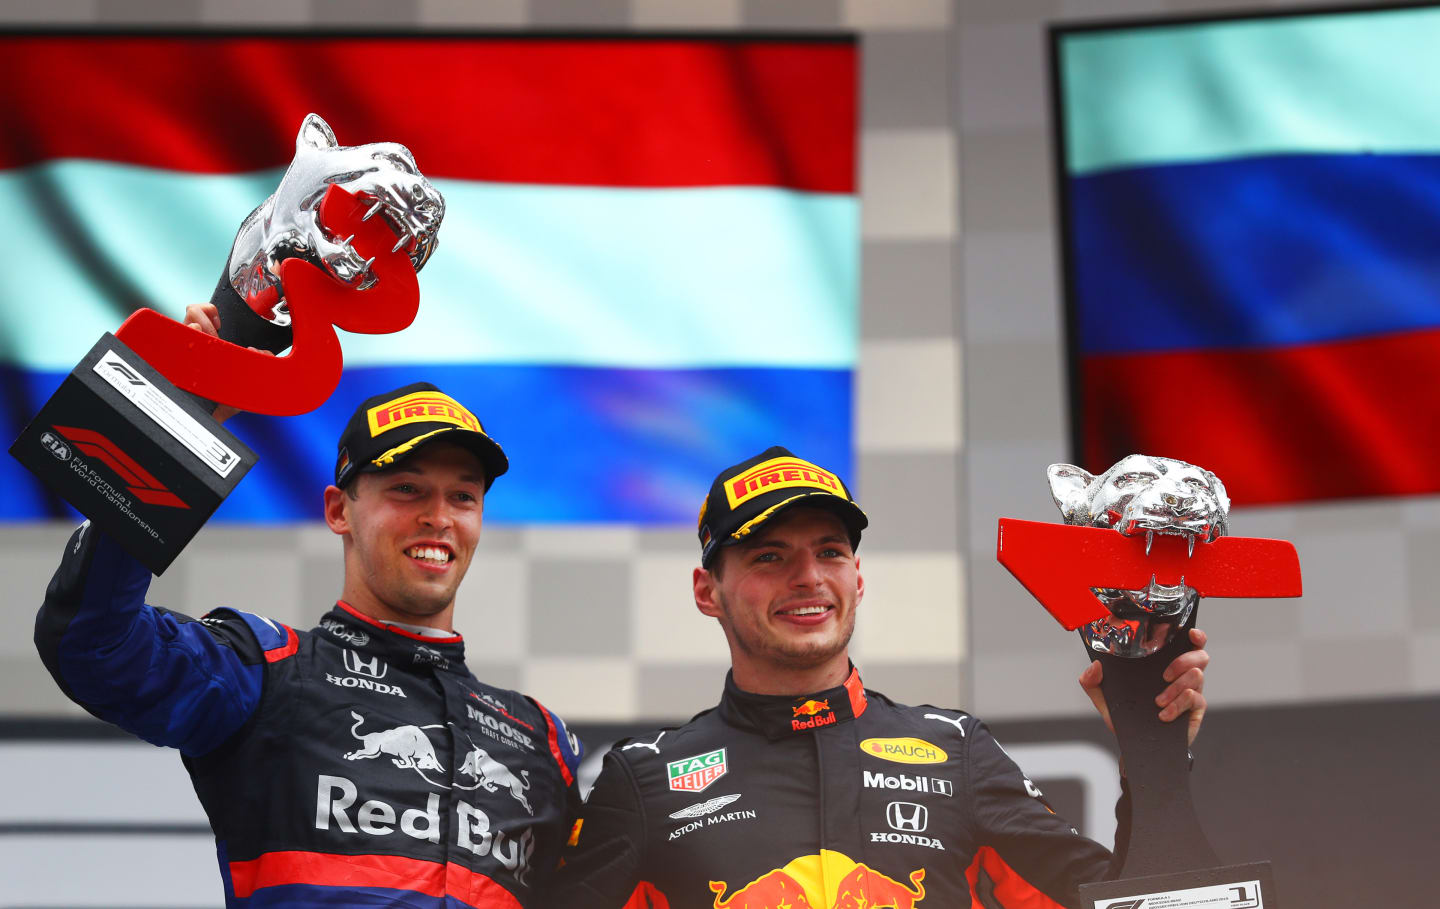 HOCKENHEIM, GERMANY - JULY 28: Race winner Max Verstappen of Netherlands and Red Bull Racing and